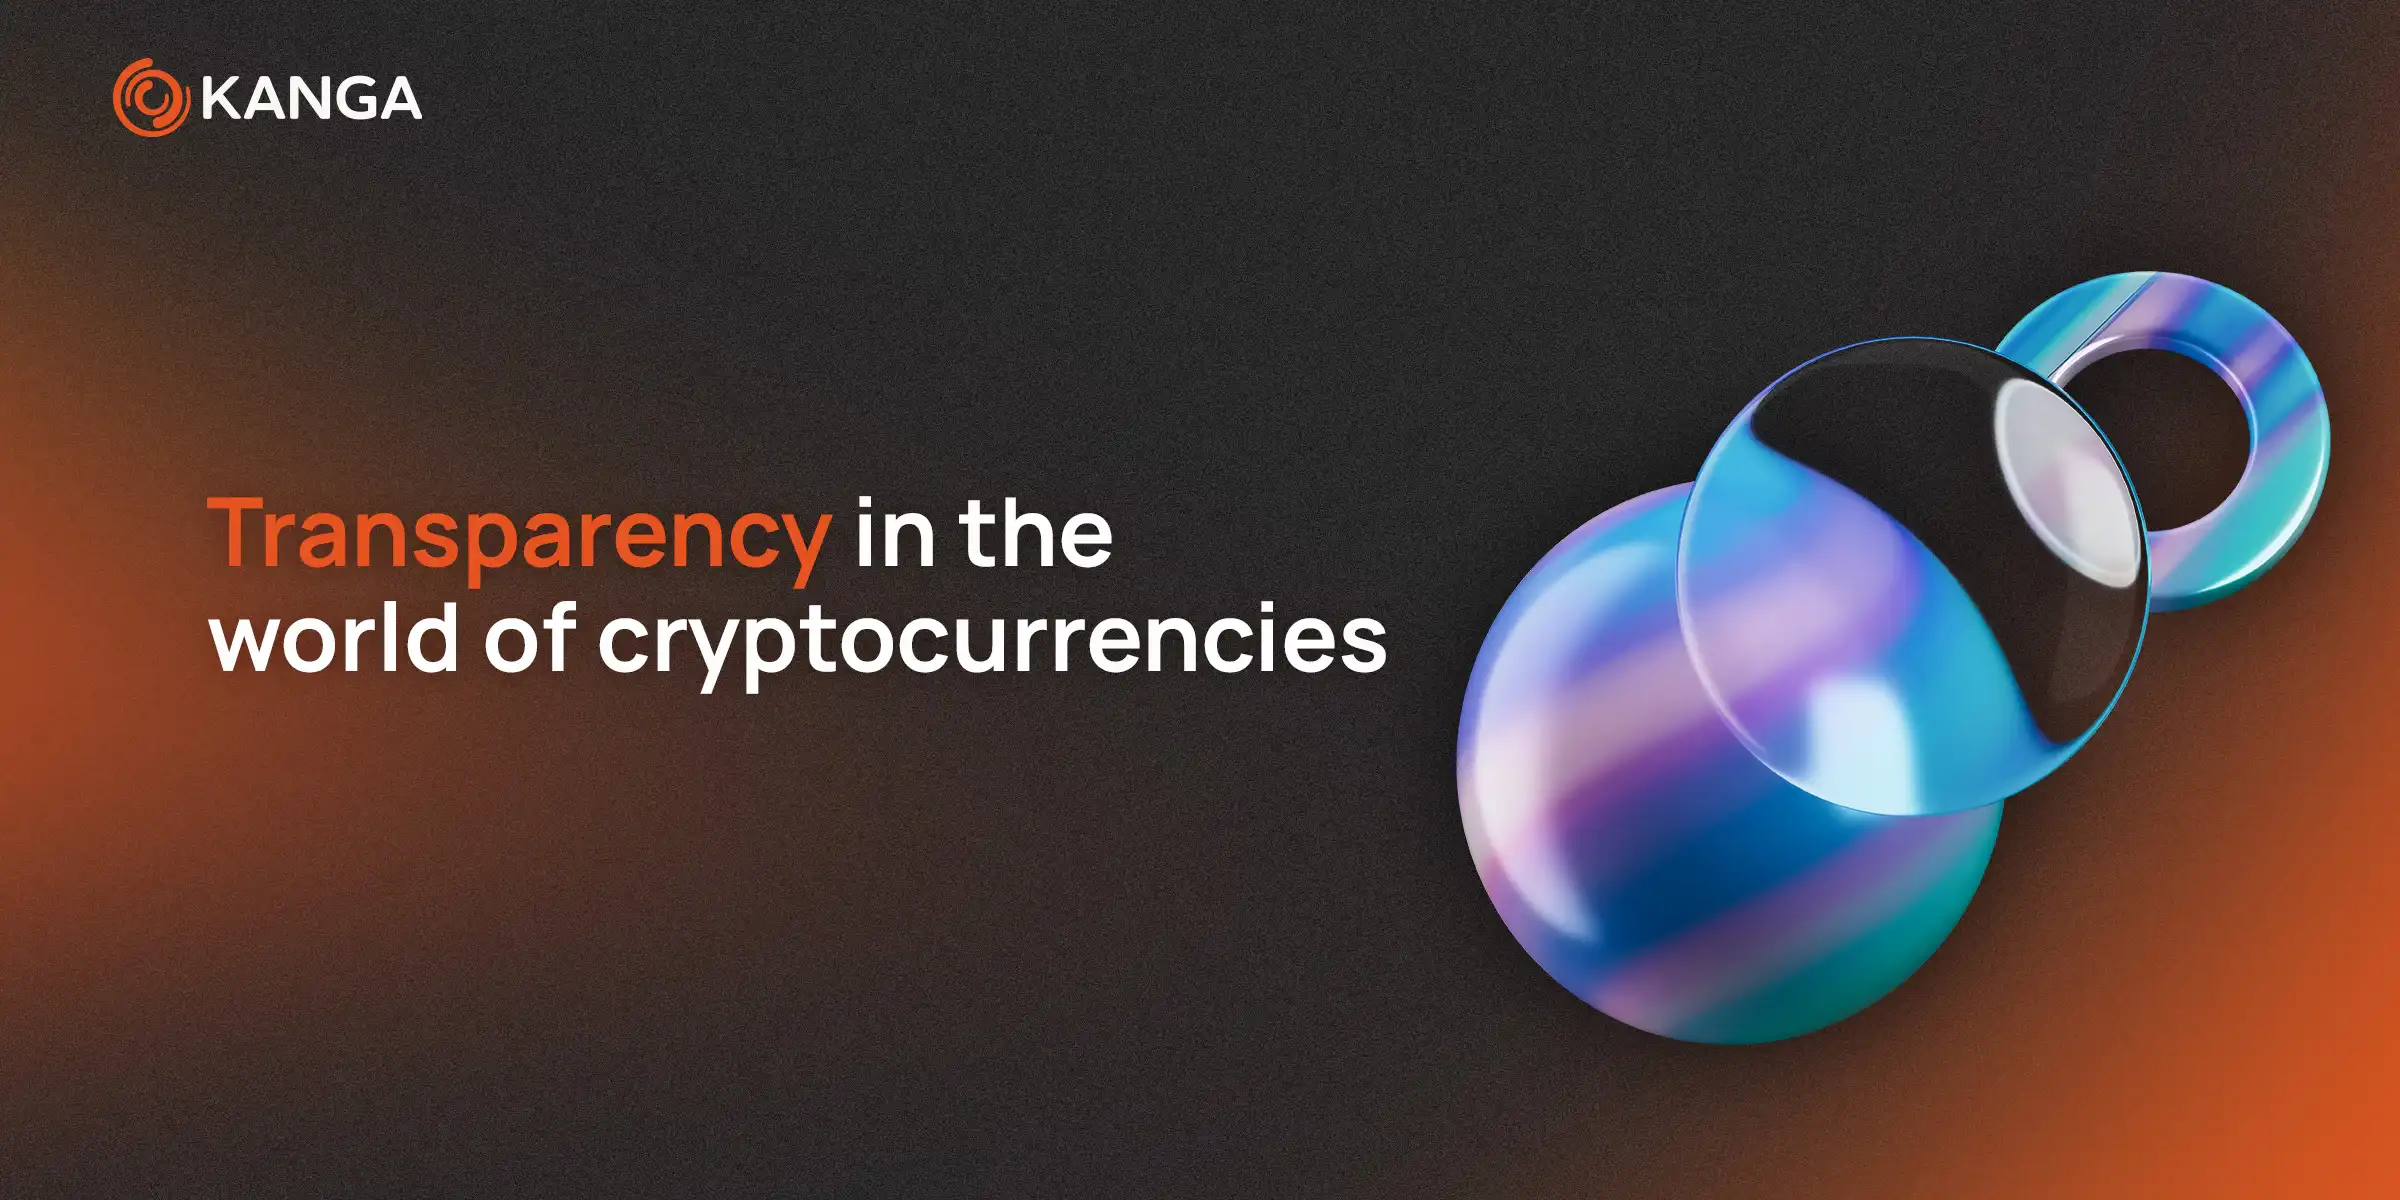 The importance of transparency and trust in the cryptocurrency ecosystem